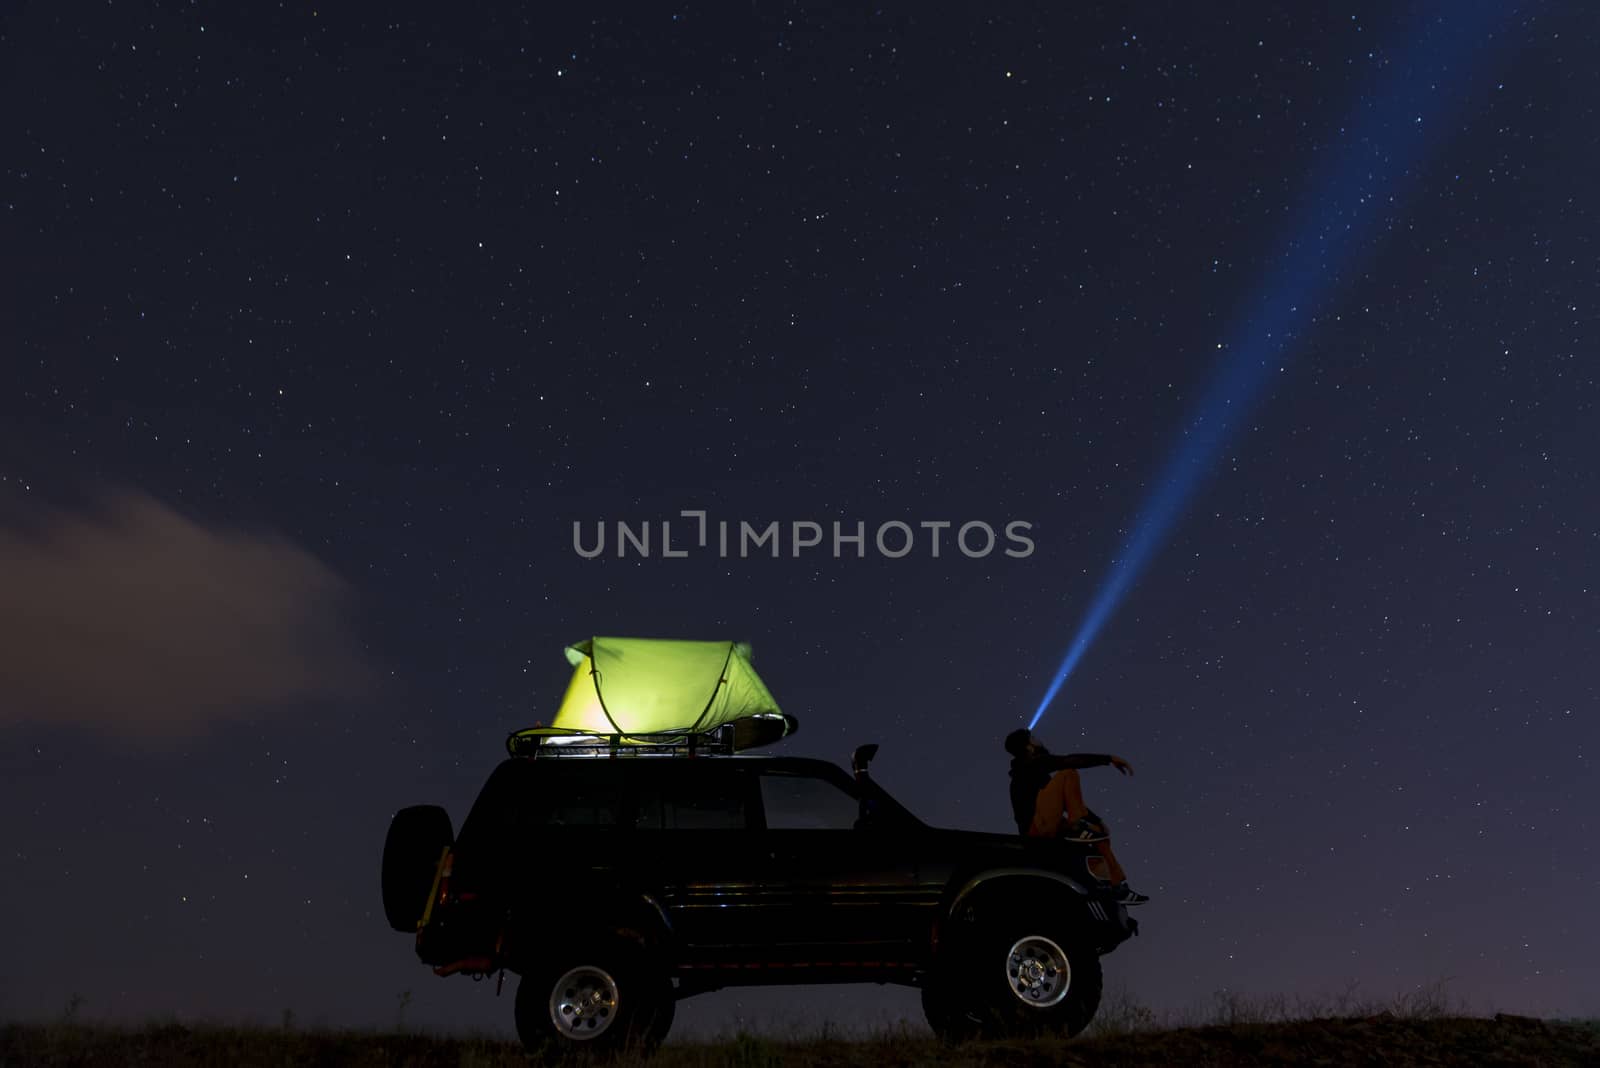 camping the night sky and watch the stars